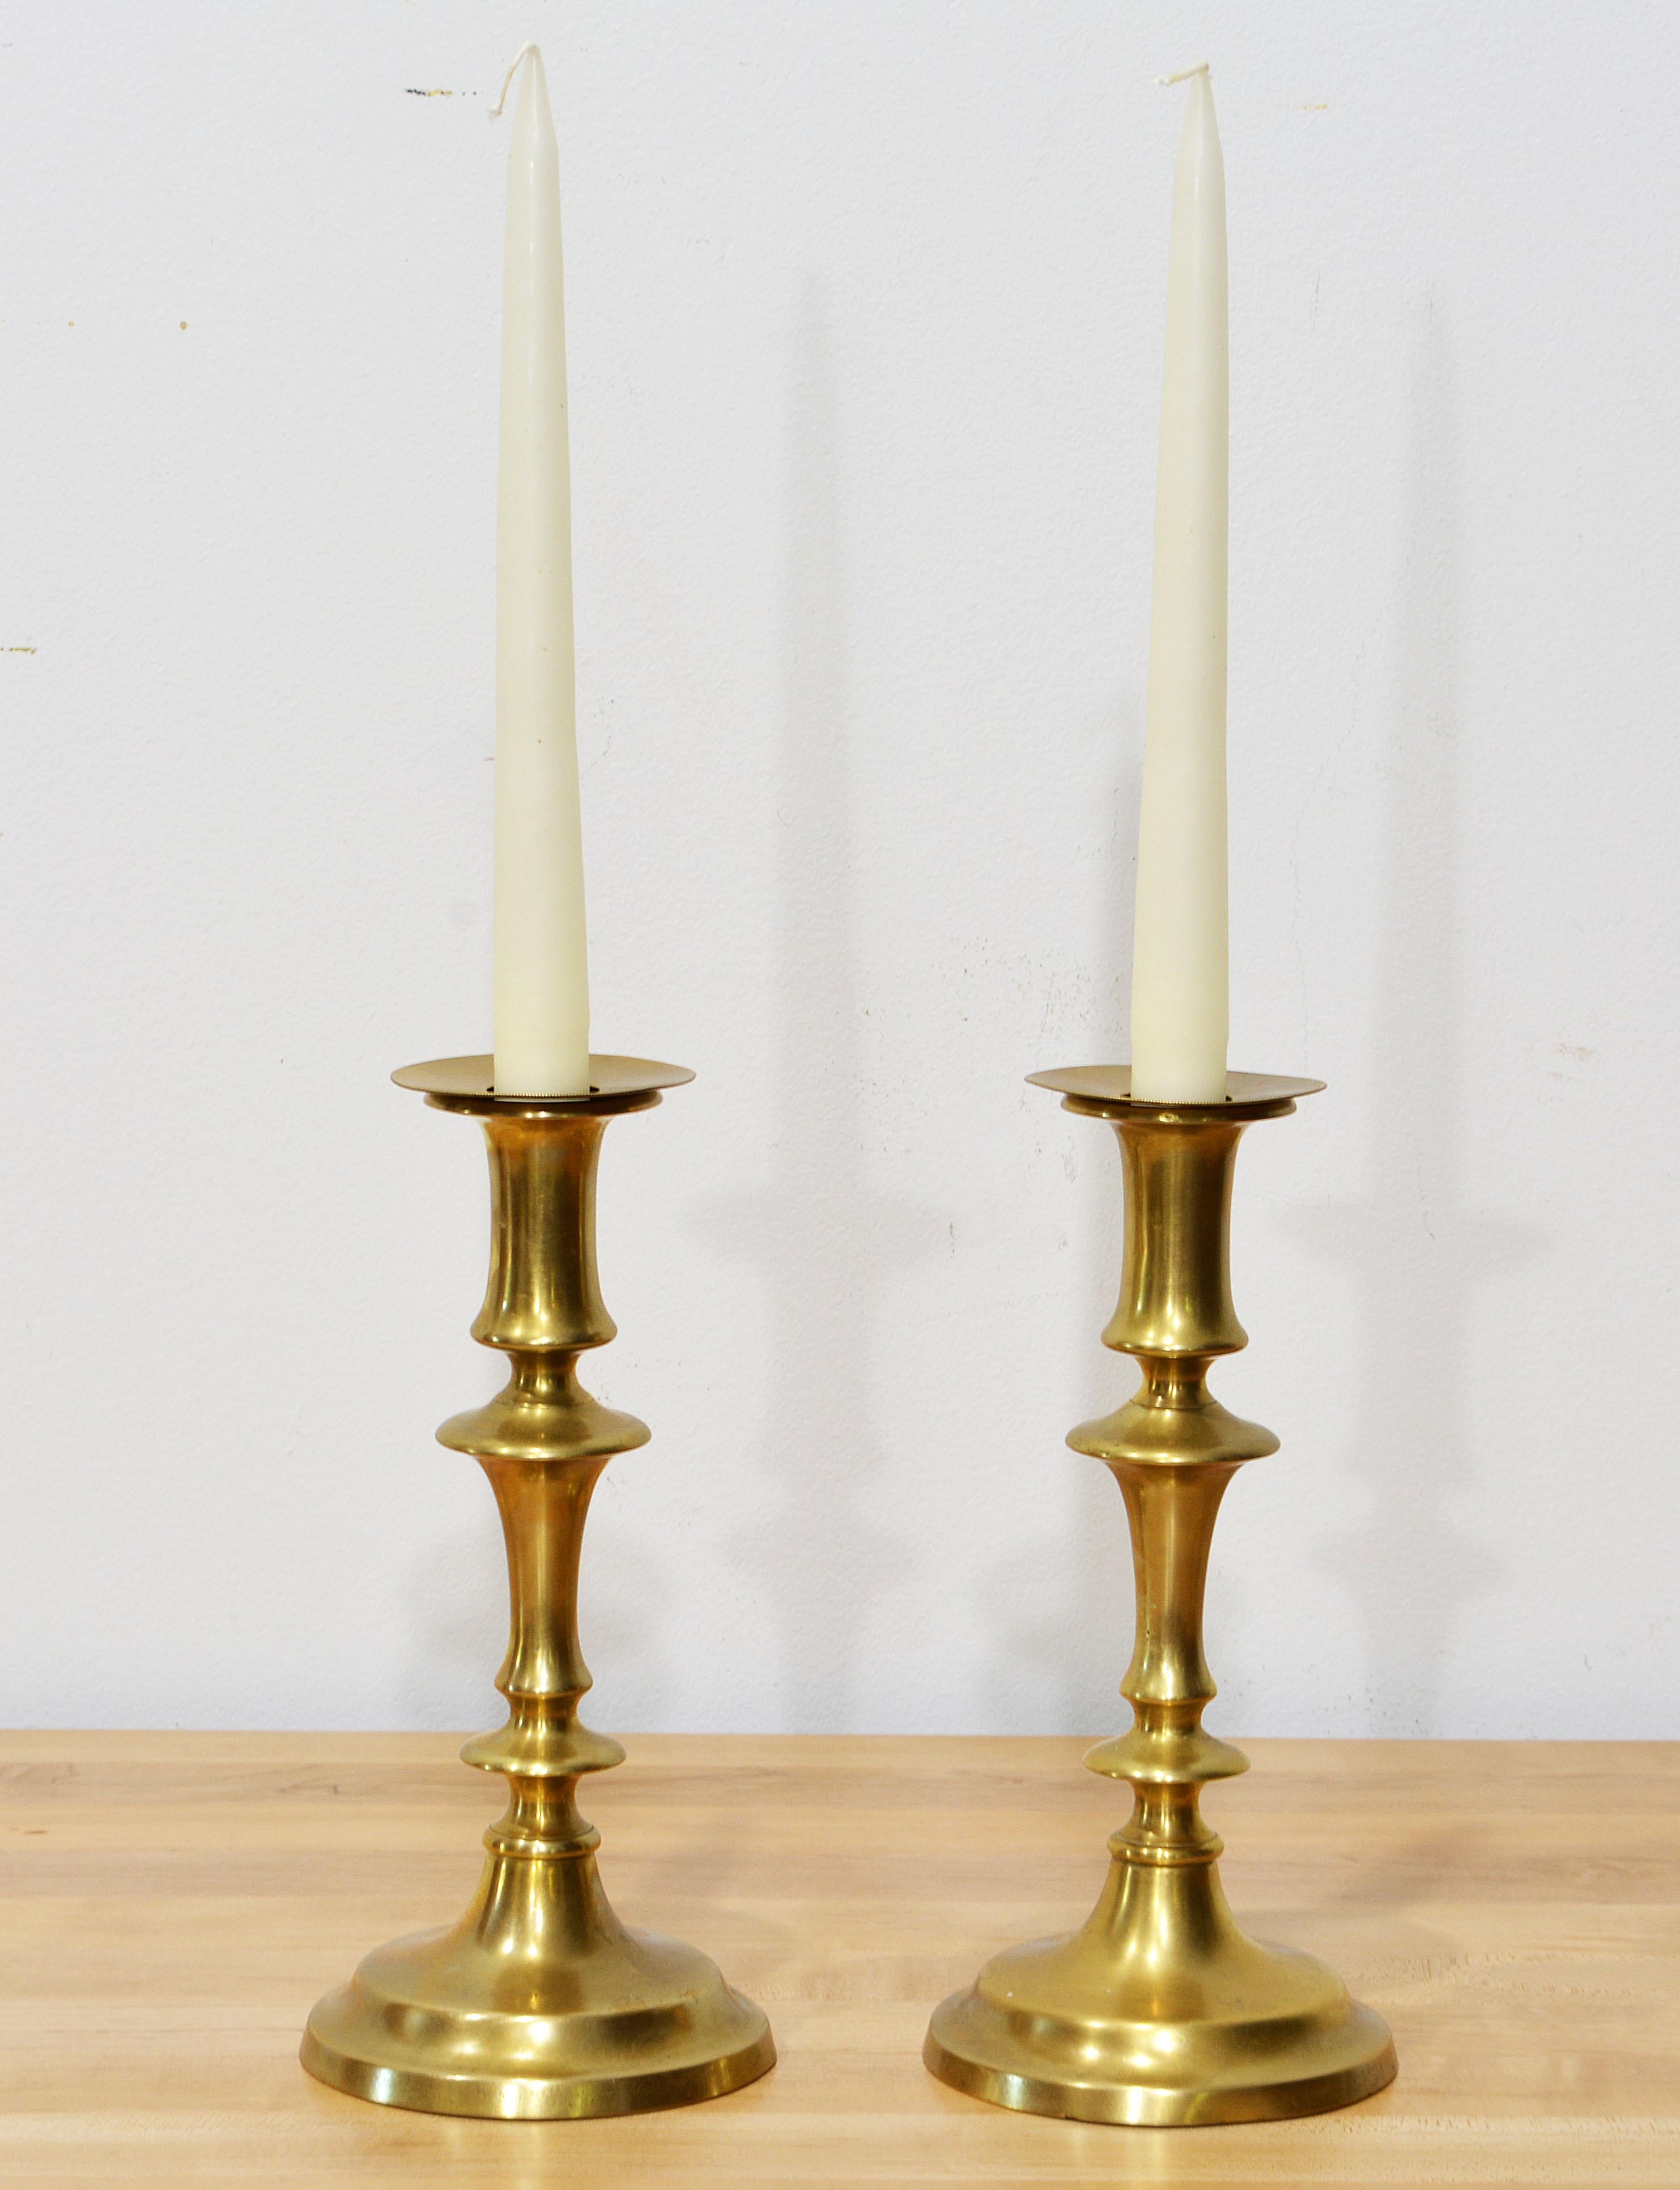 This pair of English 18th century Queen Anne brass candle sticks feature beautifully shaped stems on round softly stepped bases. The brass wheb polished shows an attractive mellow shine reflecting years of use and maintenance. They come with drip